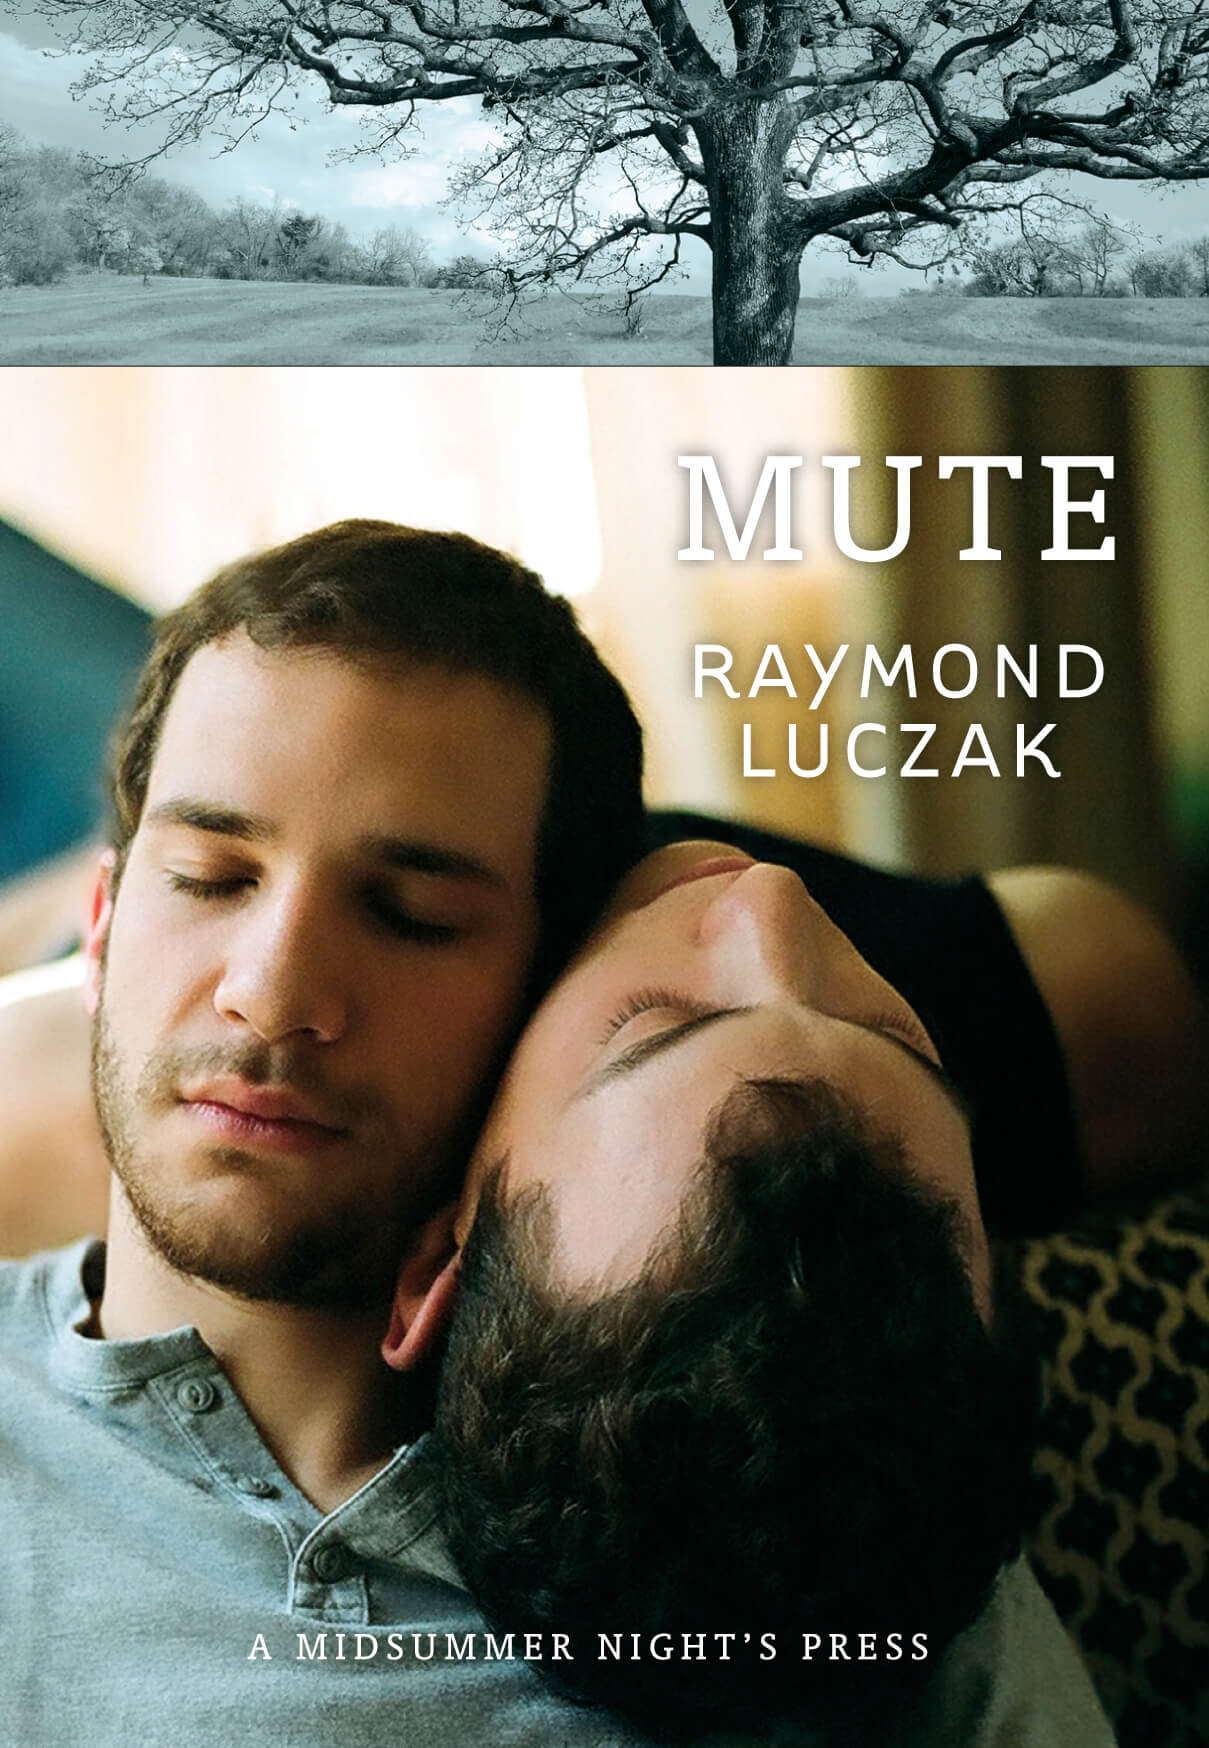 The cover shows two photographs: A panoramic shot of a gnarly tree in the foreground against a manicured lawn far into the distance; the black-and-white photograph is tinted in a light teal. Below it is a pair of young men closing their eyes and resting their heads against each other off the edge of a sofa. The wall to the right shows the title and author's name in white: MUTE | RAYMOND LUCZAK. Near the bottom of the image says A MIDSUMMER NIGHT'S PRESS.